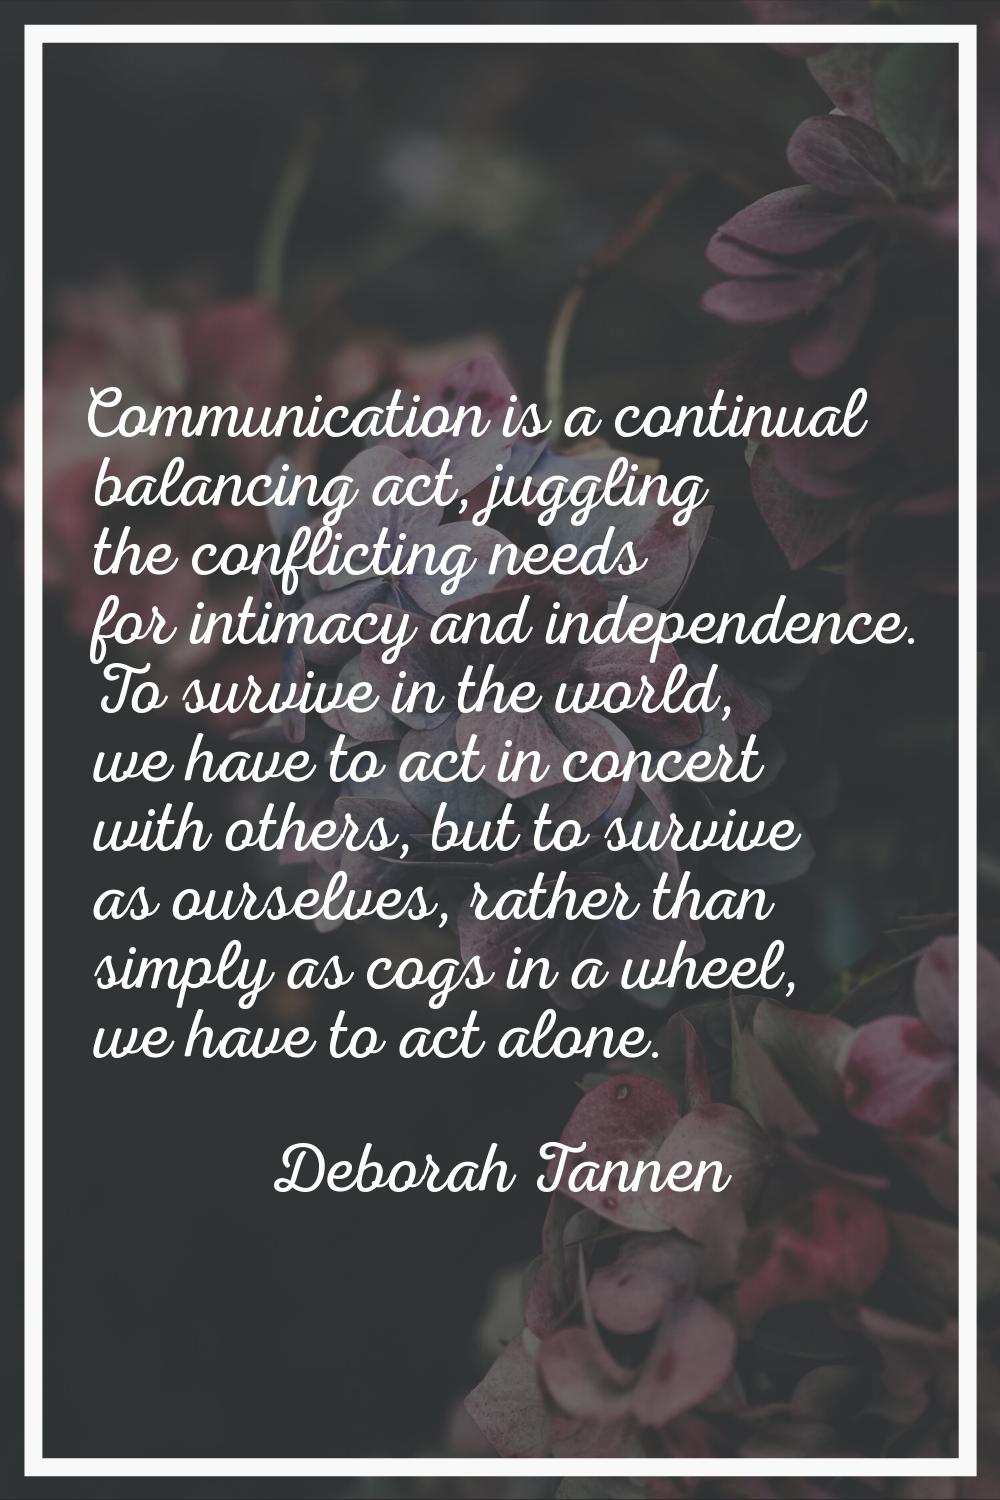 Communication is a continual balancing act, juggling the conflicting needs for intimacy and indepen